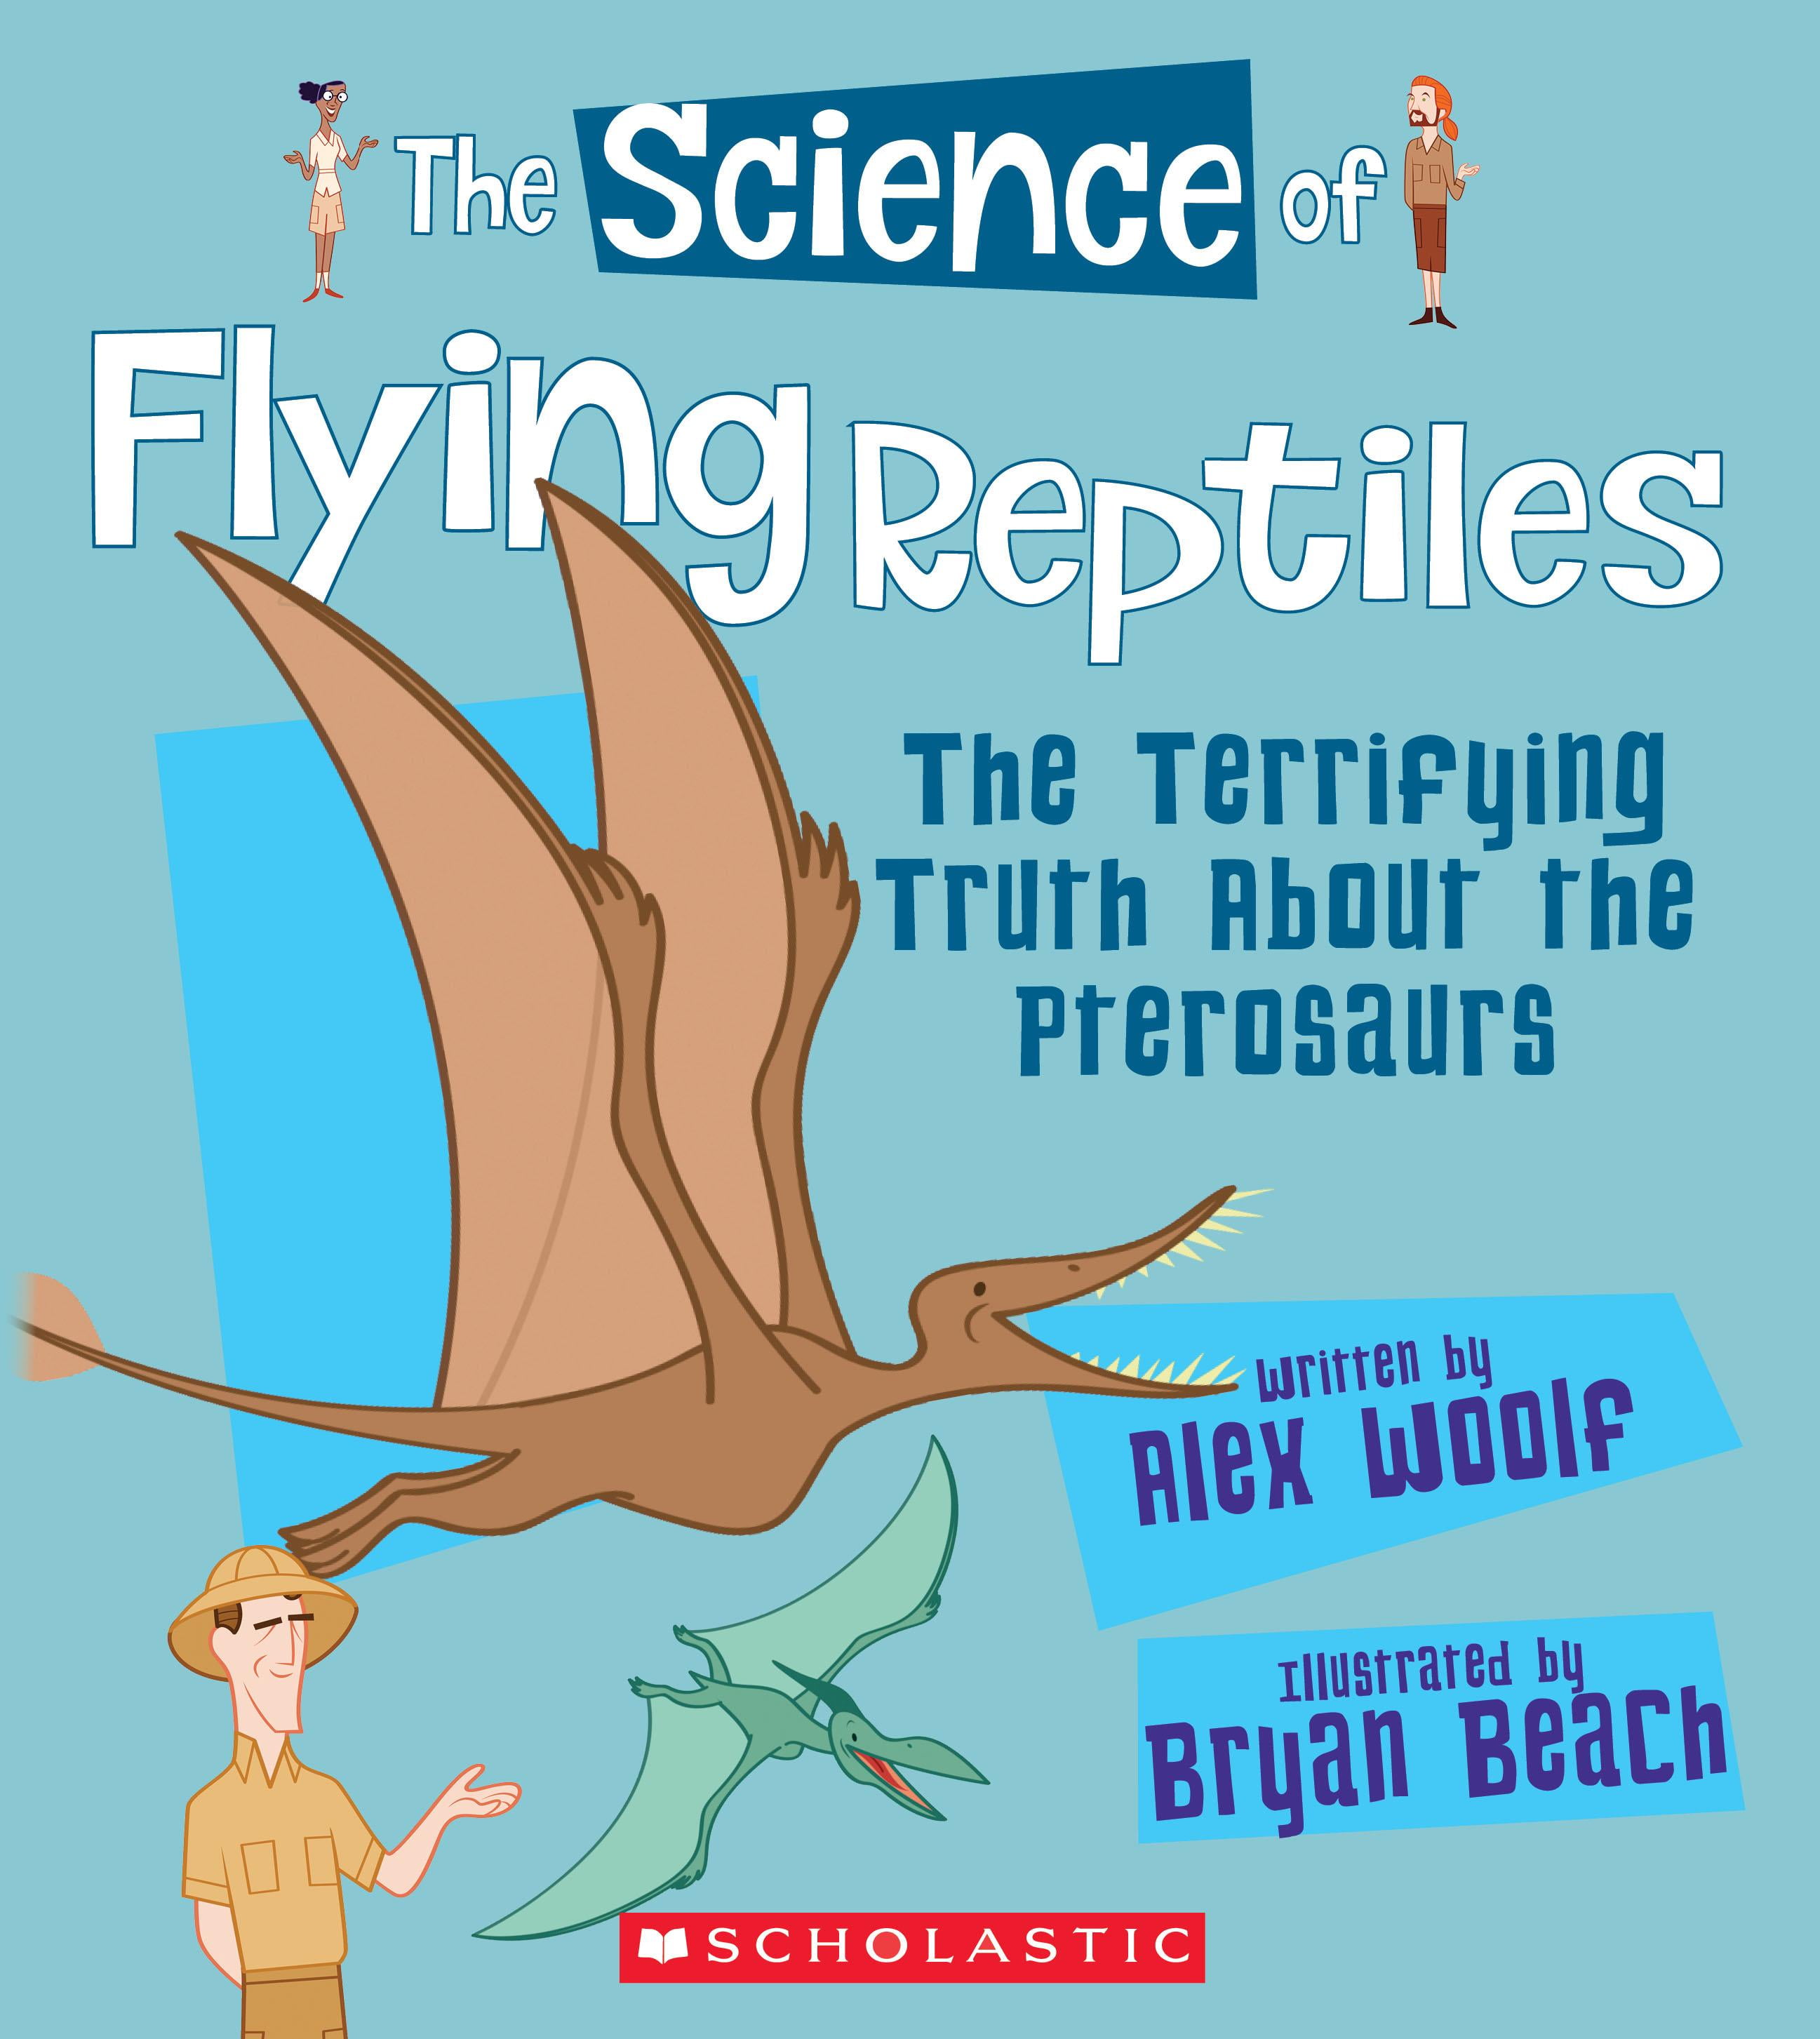  Science  of Dinosaurs  The Science  of Flying Reptiles The 